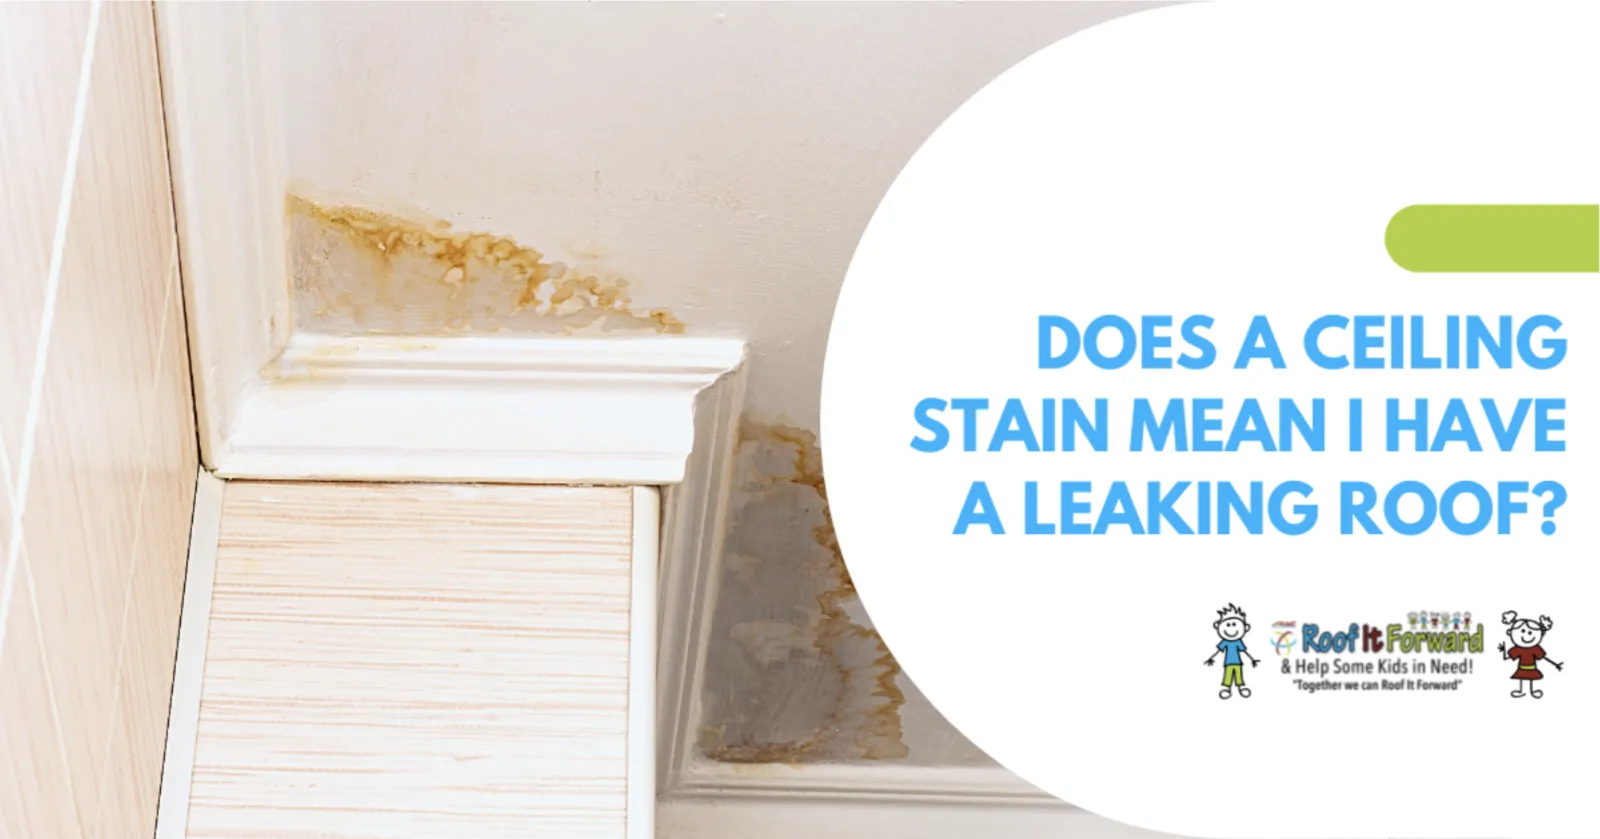 Does a Ceiling Stain mean that I have a leaking roof?